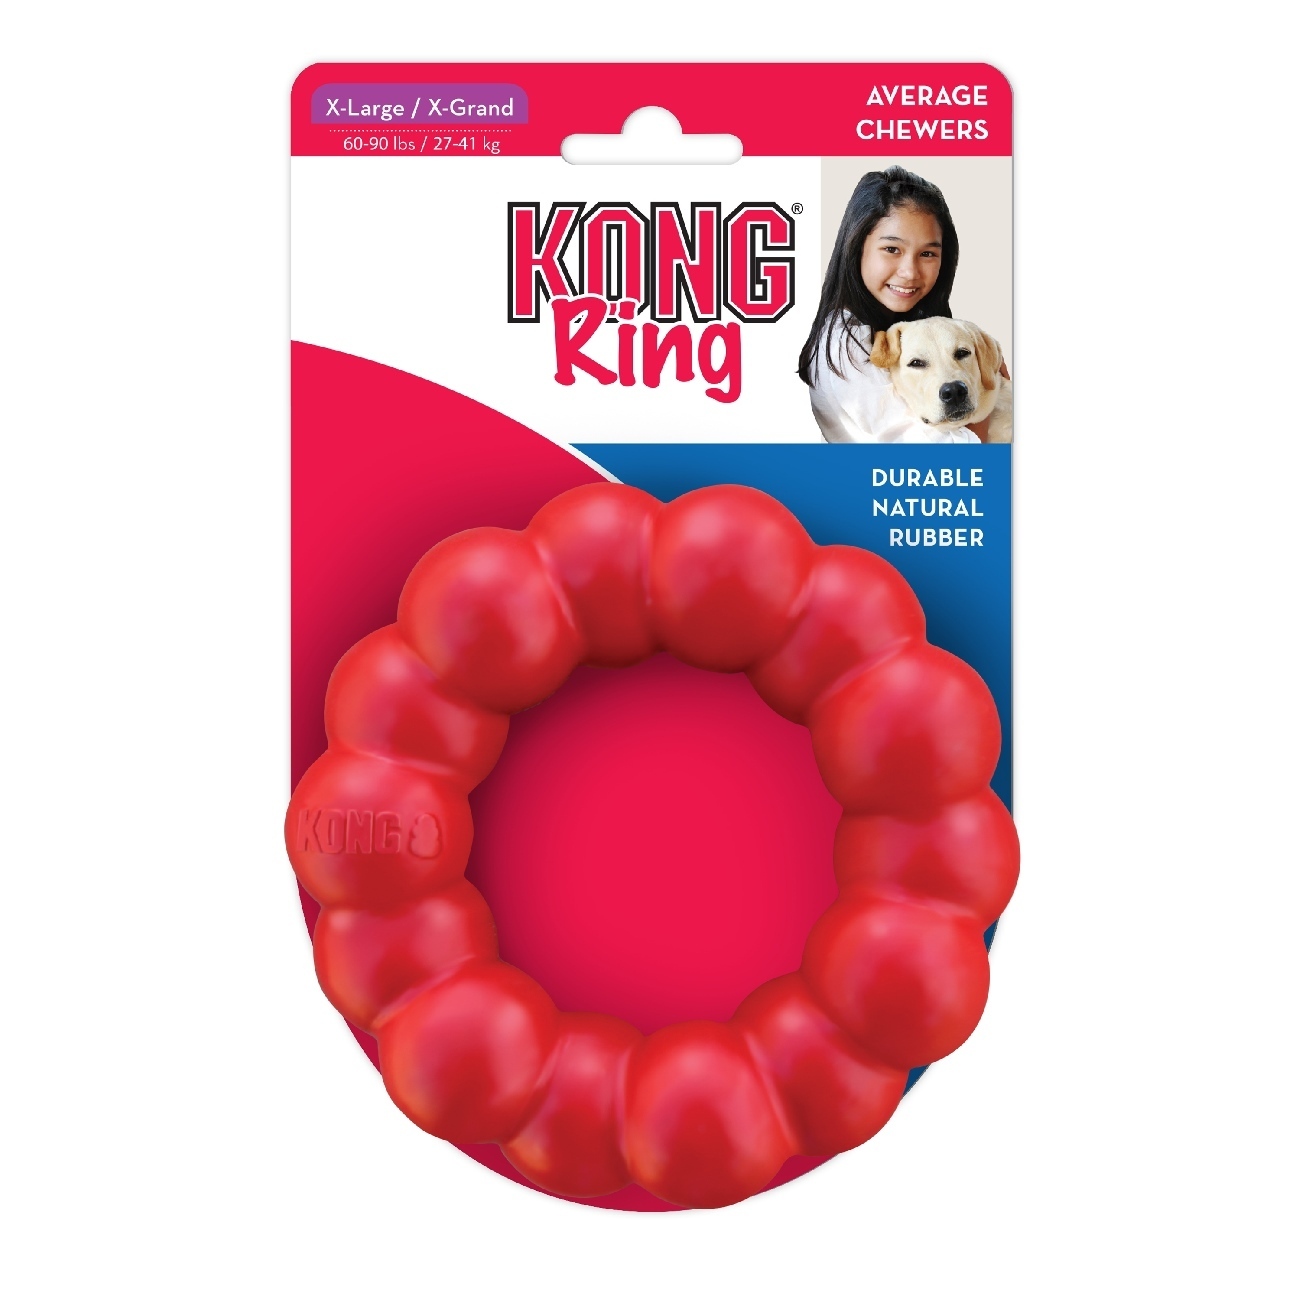 3 x KONG Natural Red Rubber Ring Dog Toy for Healthy Teeth & Gums - X-Large image 1